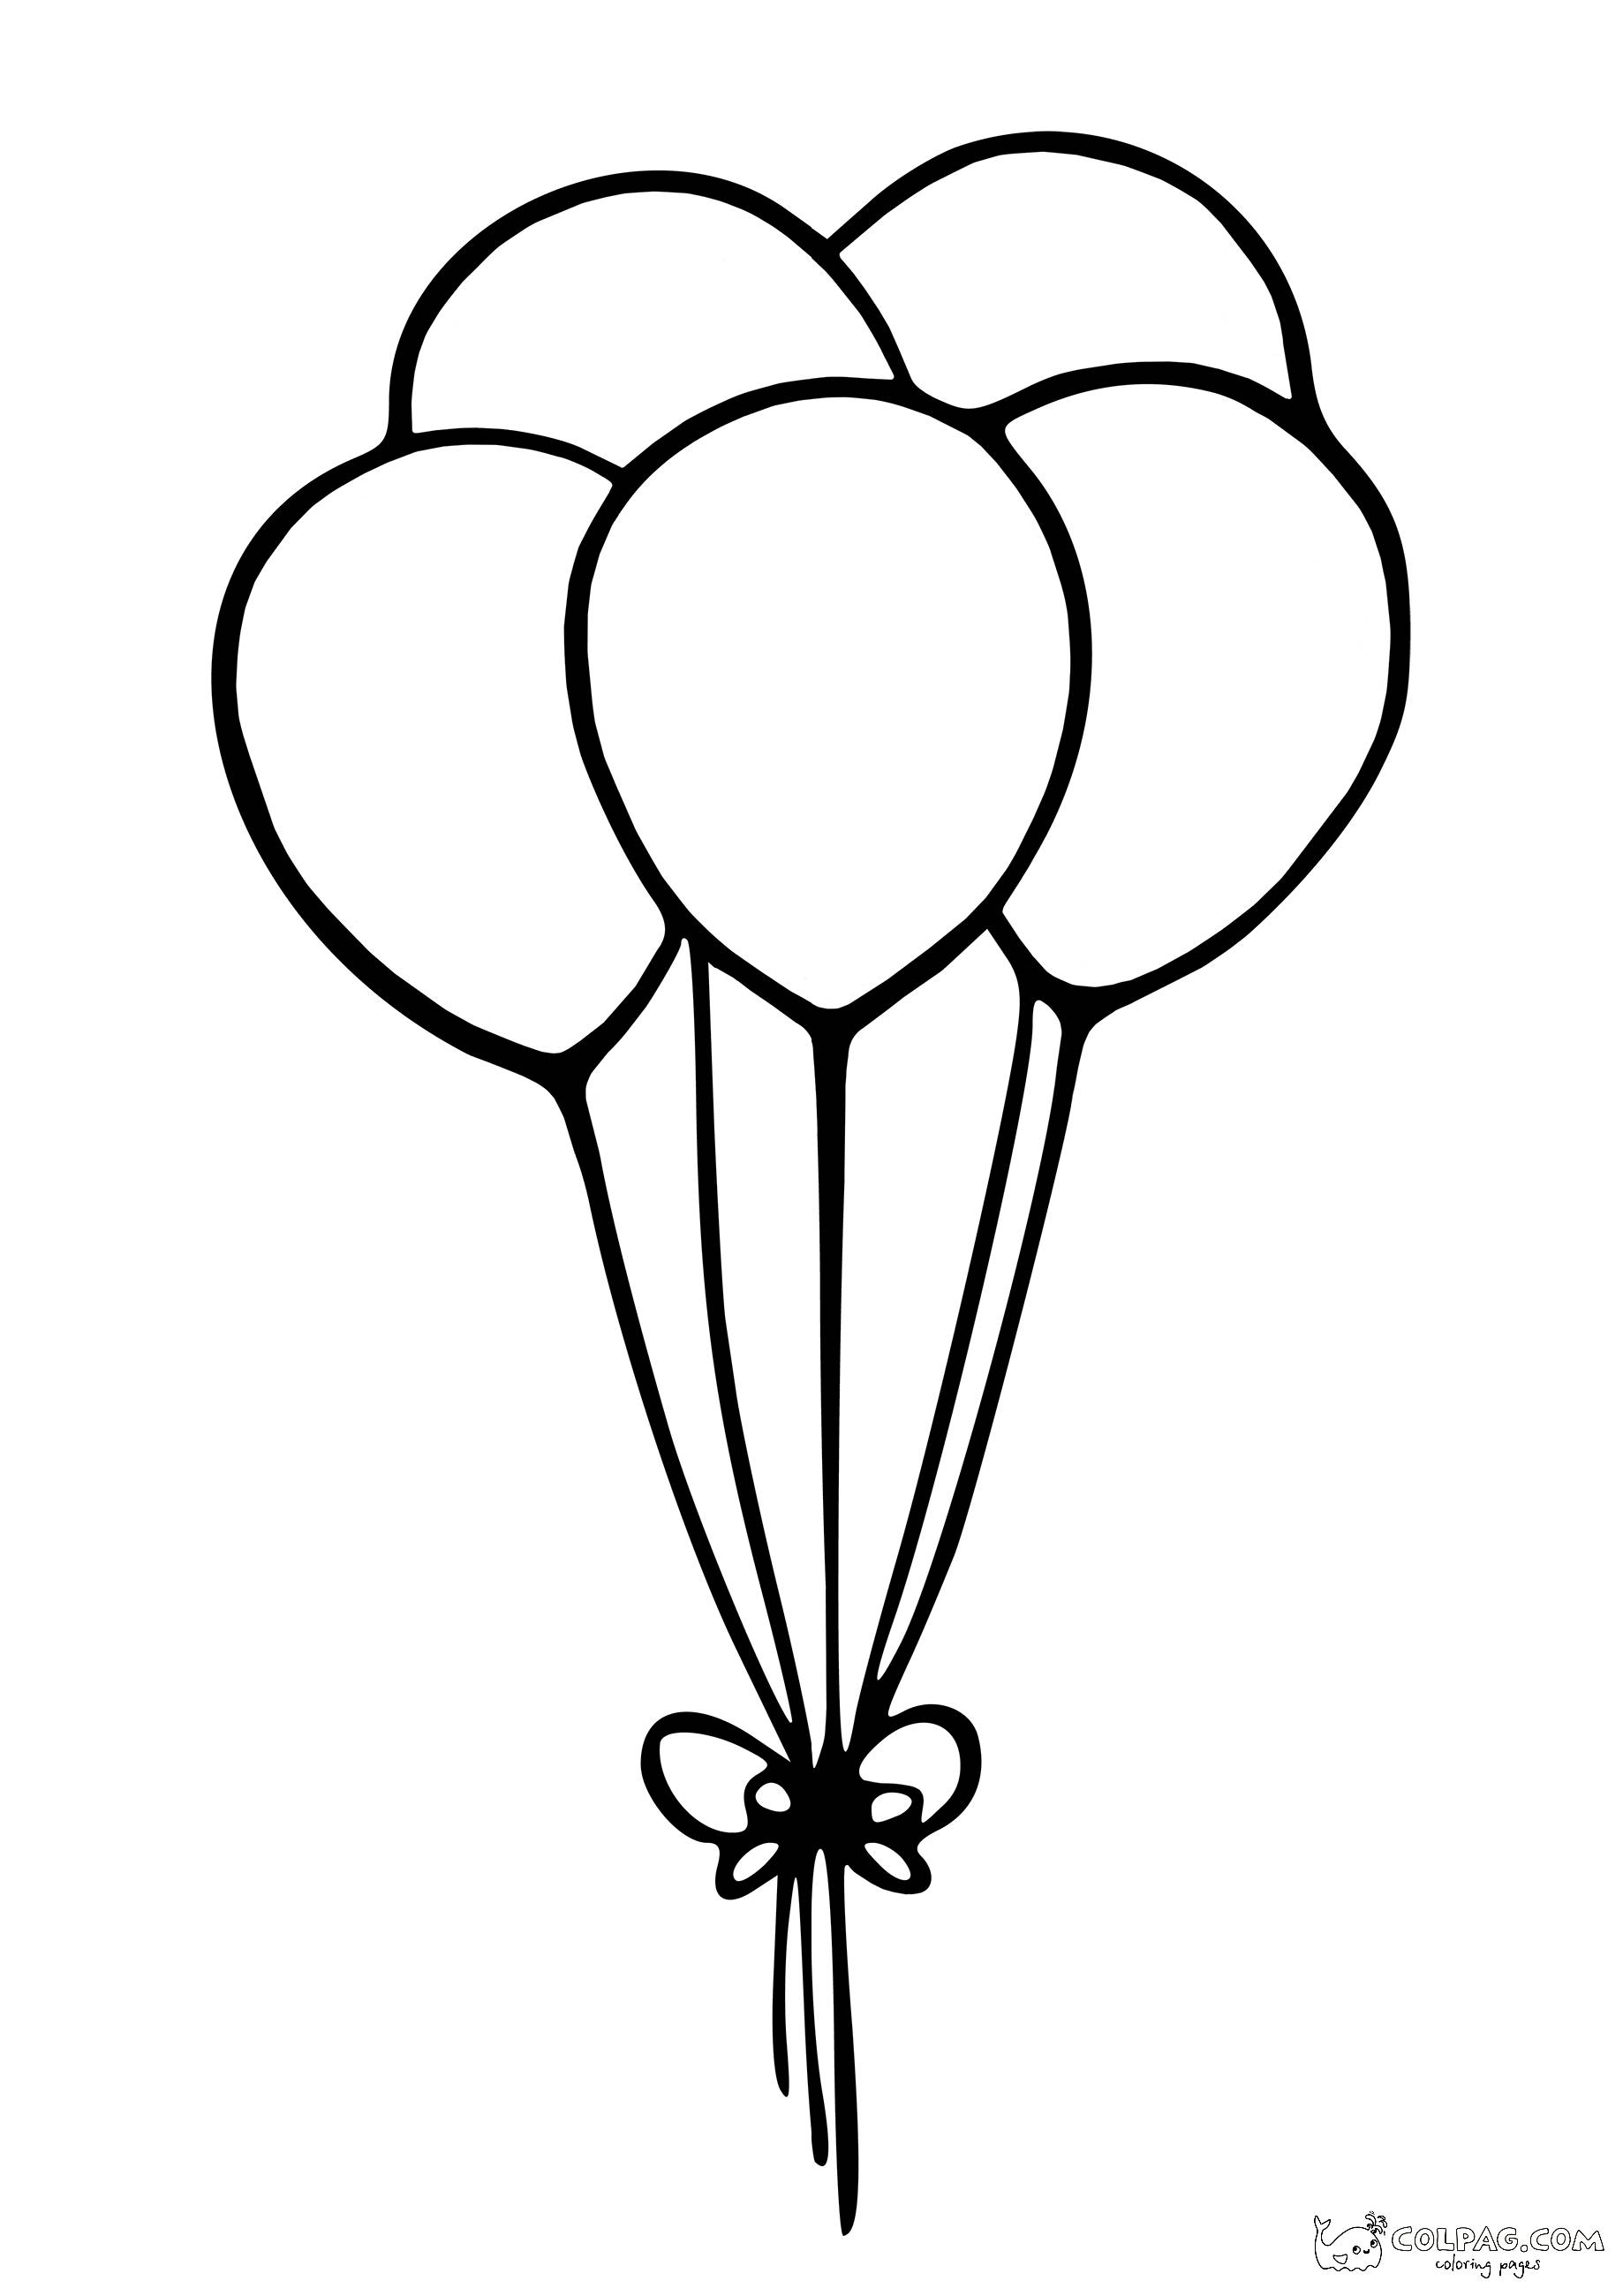 28-five-baloons-staying-still-coloring-page-colpag-28